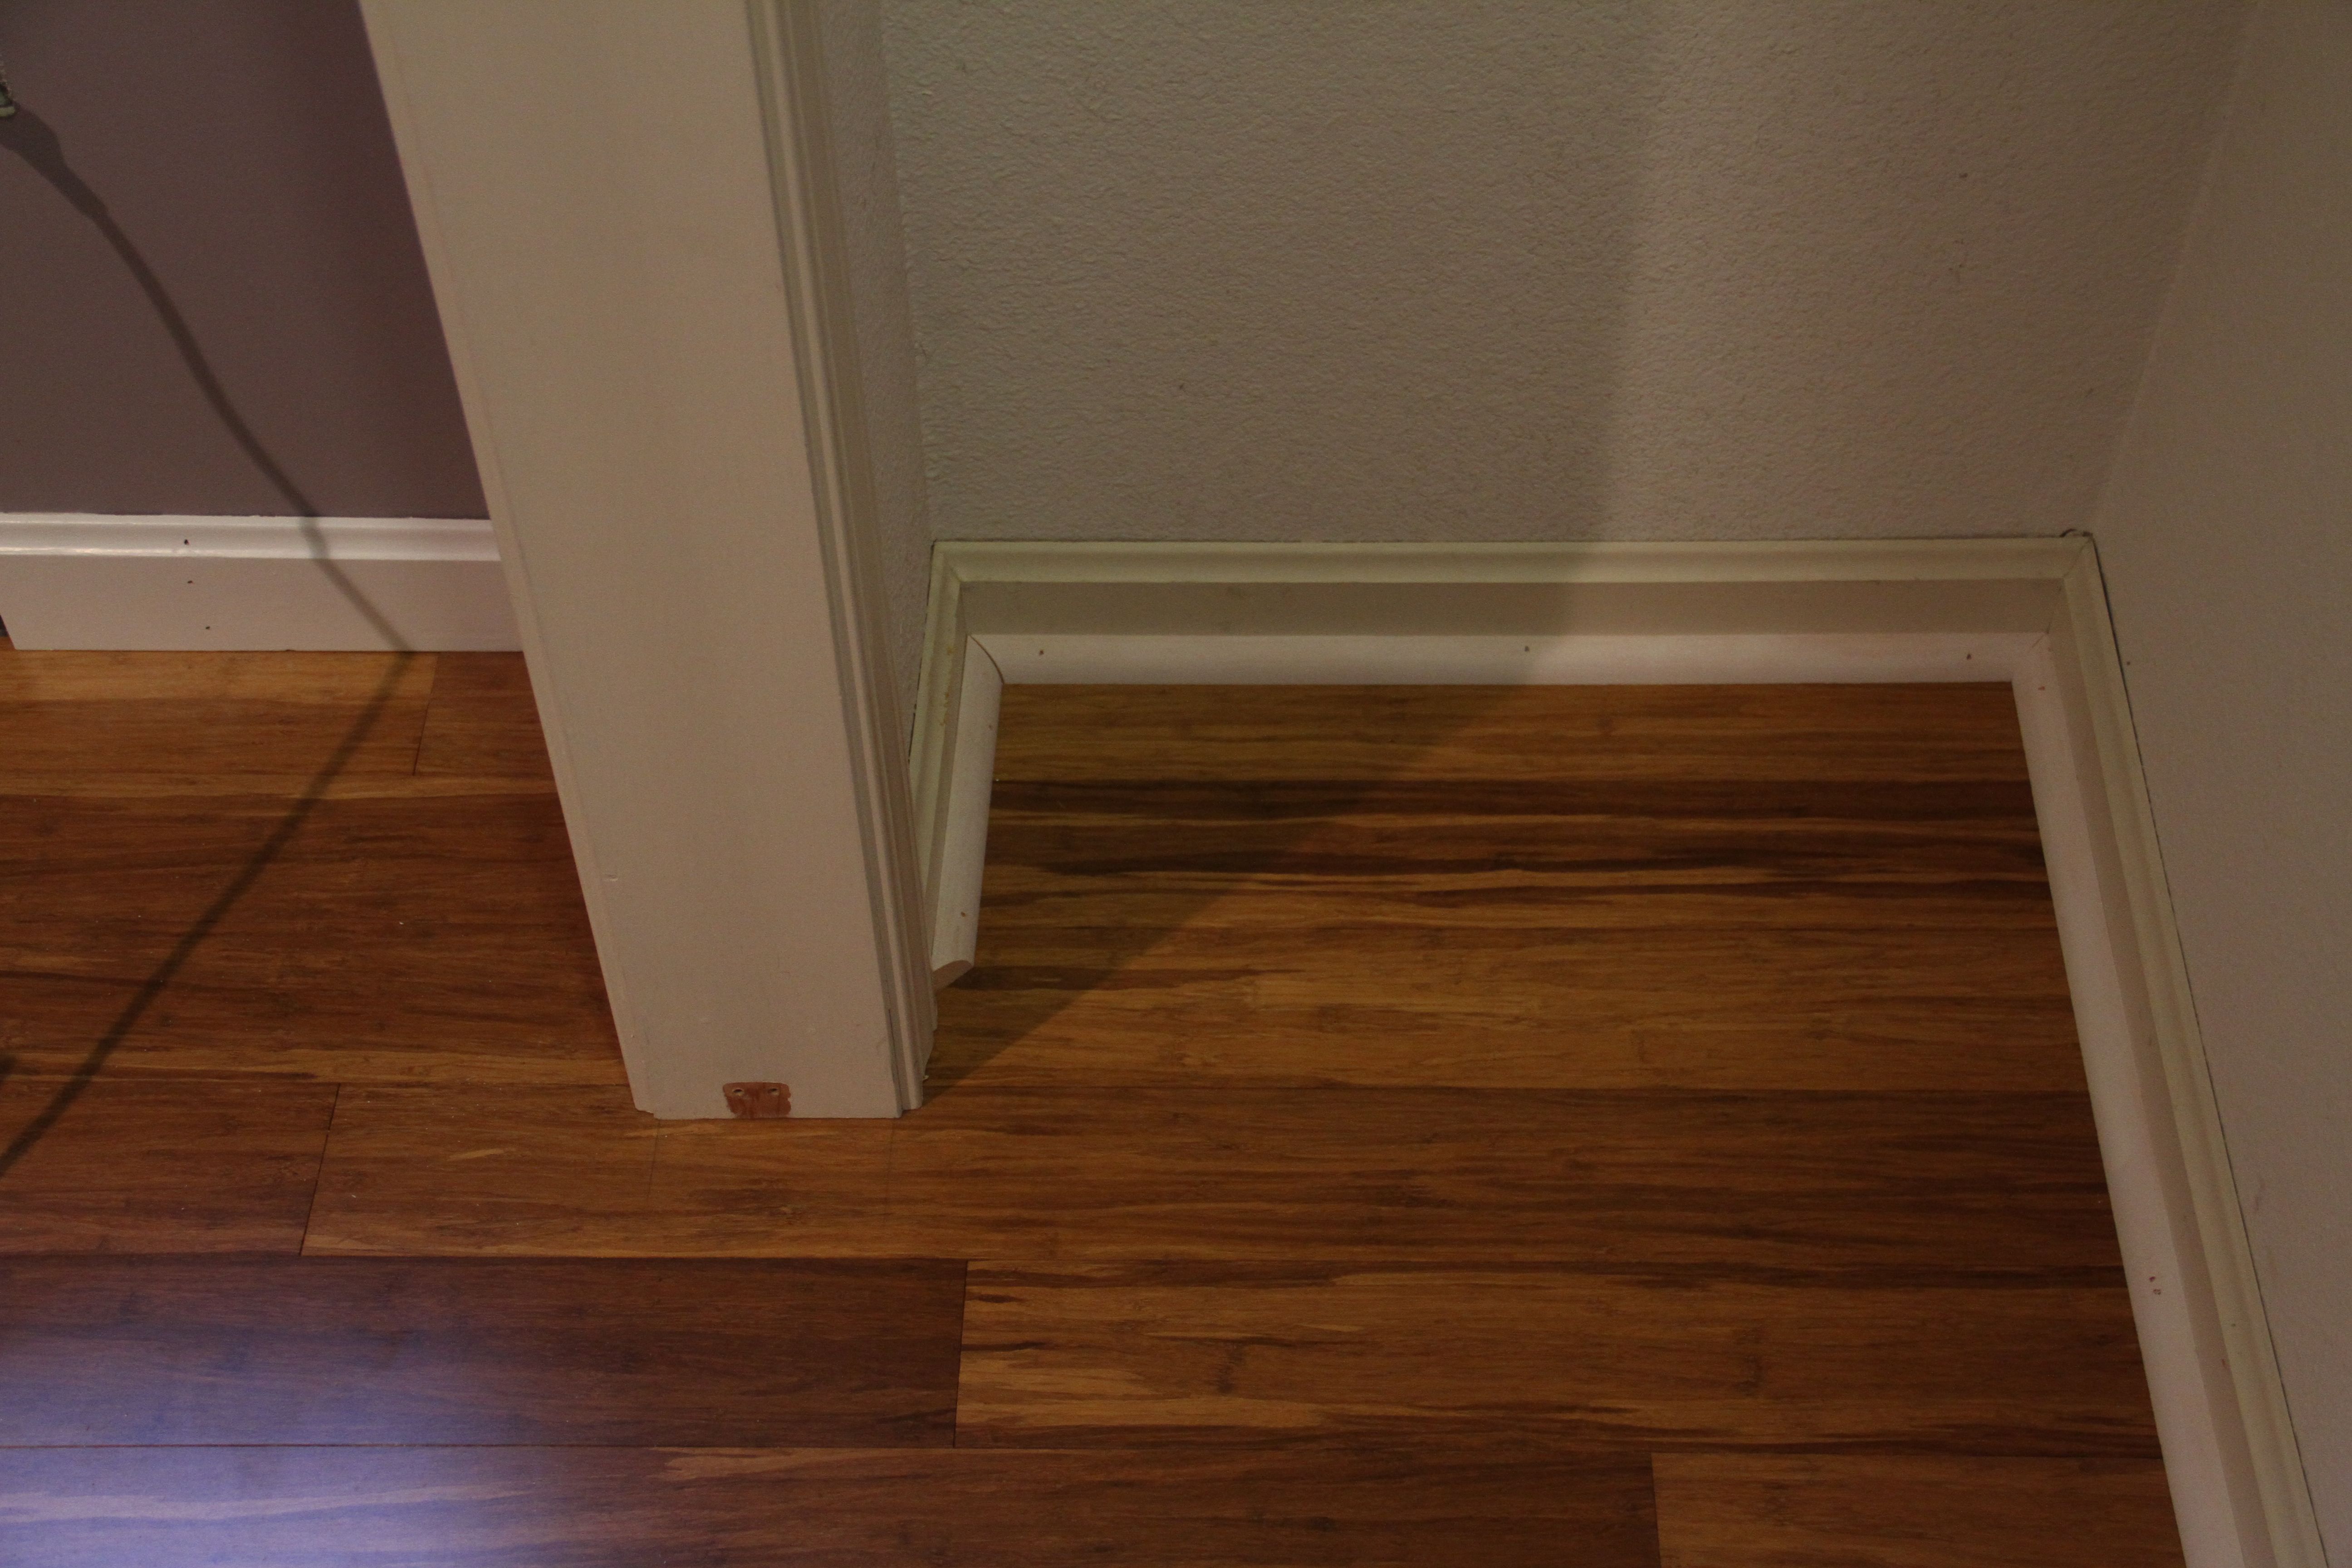 See? Quarter round as shoe plus baseboard alone in the main spaces. It works and it saved us some precious time this year.